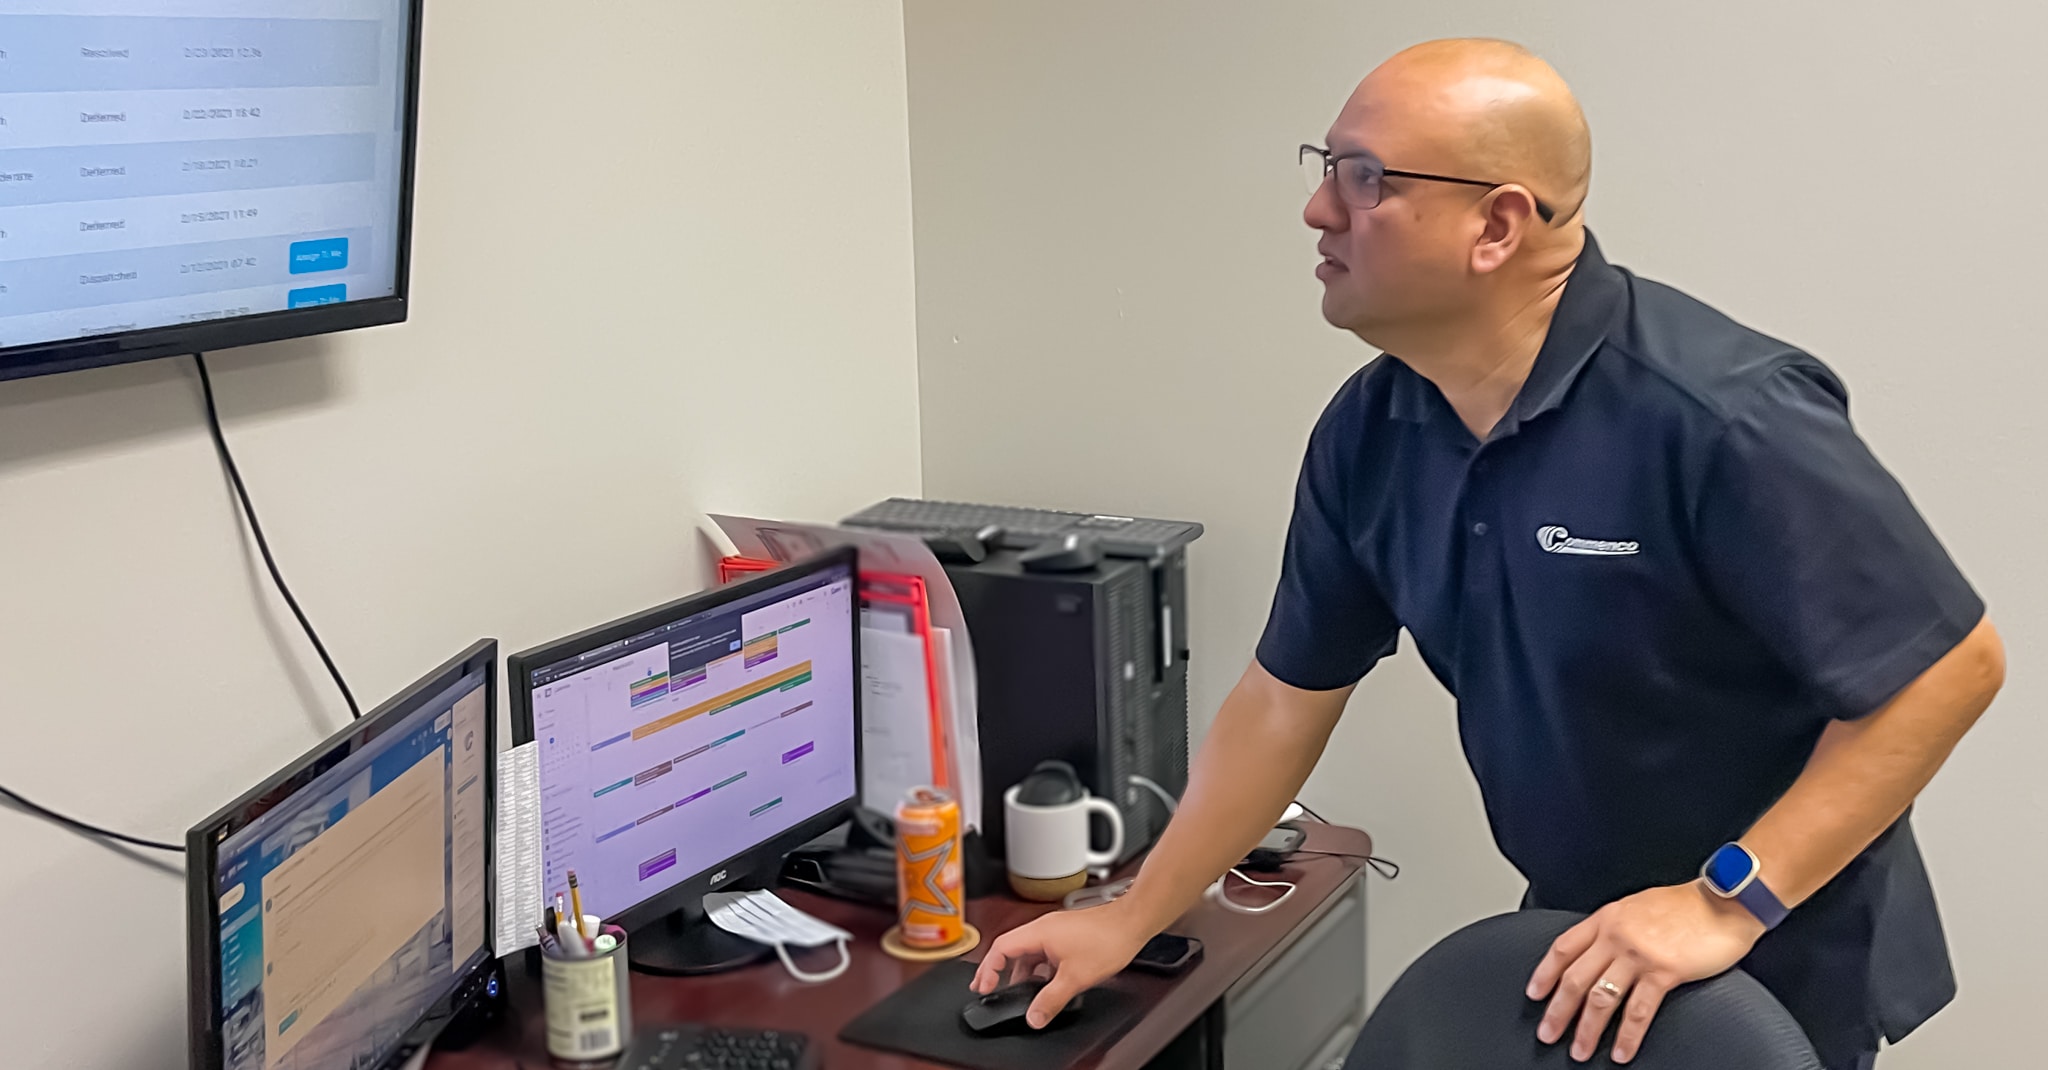 Ralph Aguilar, Commenco Technical Services Manager monitors network traffic on digital board